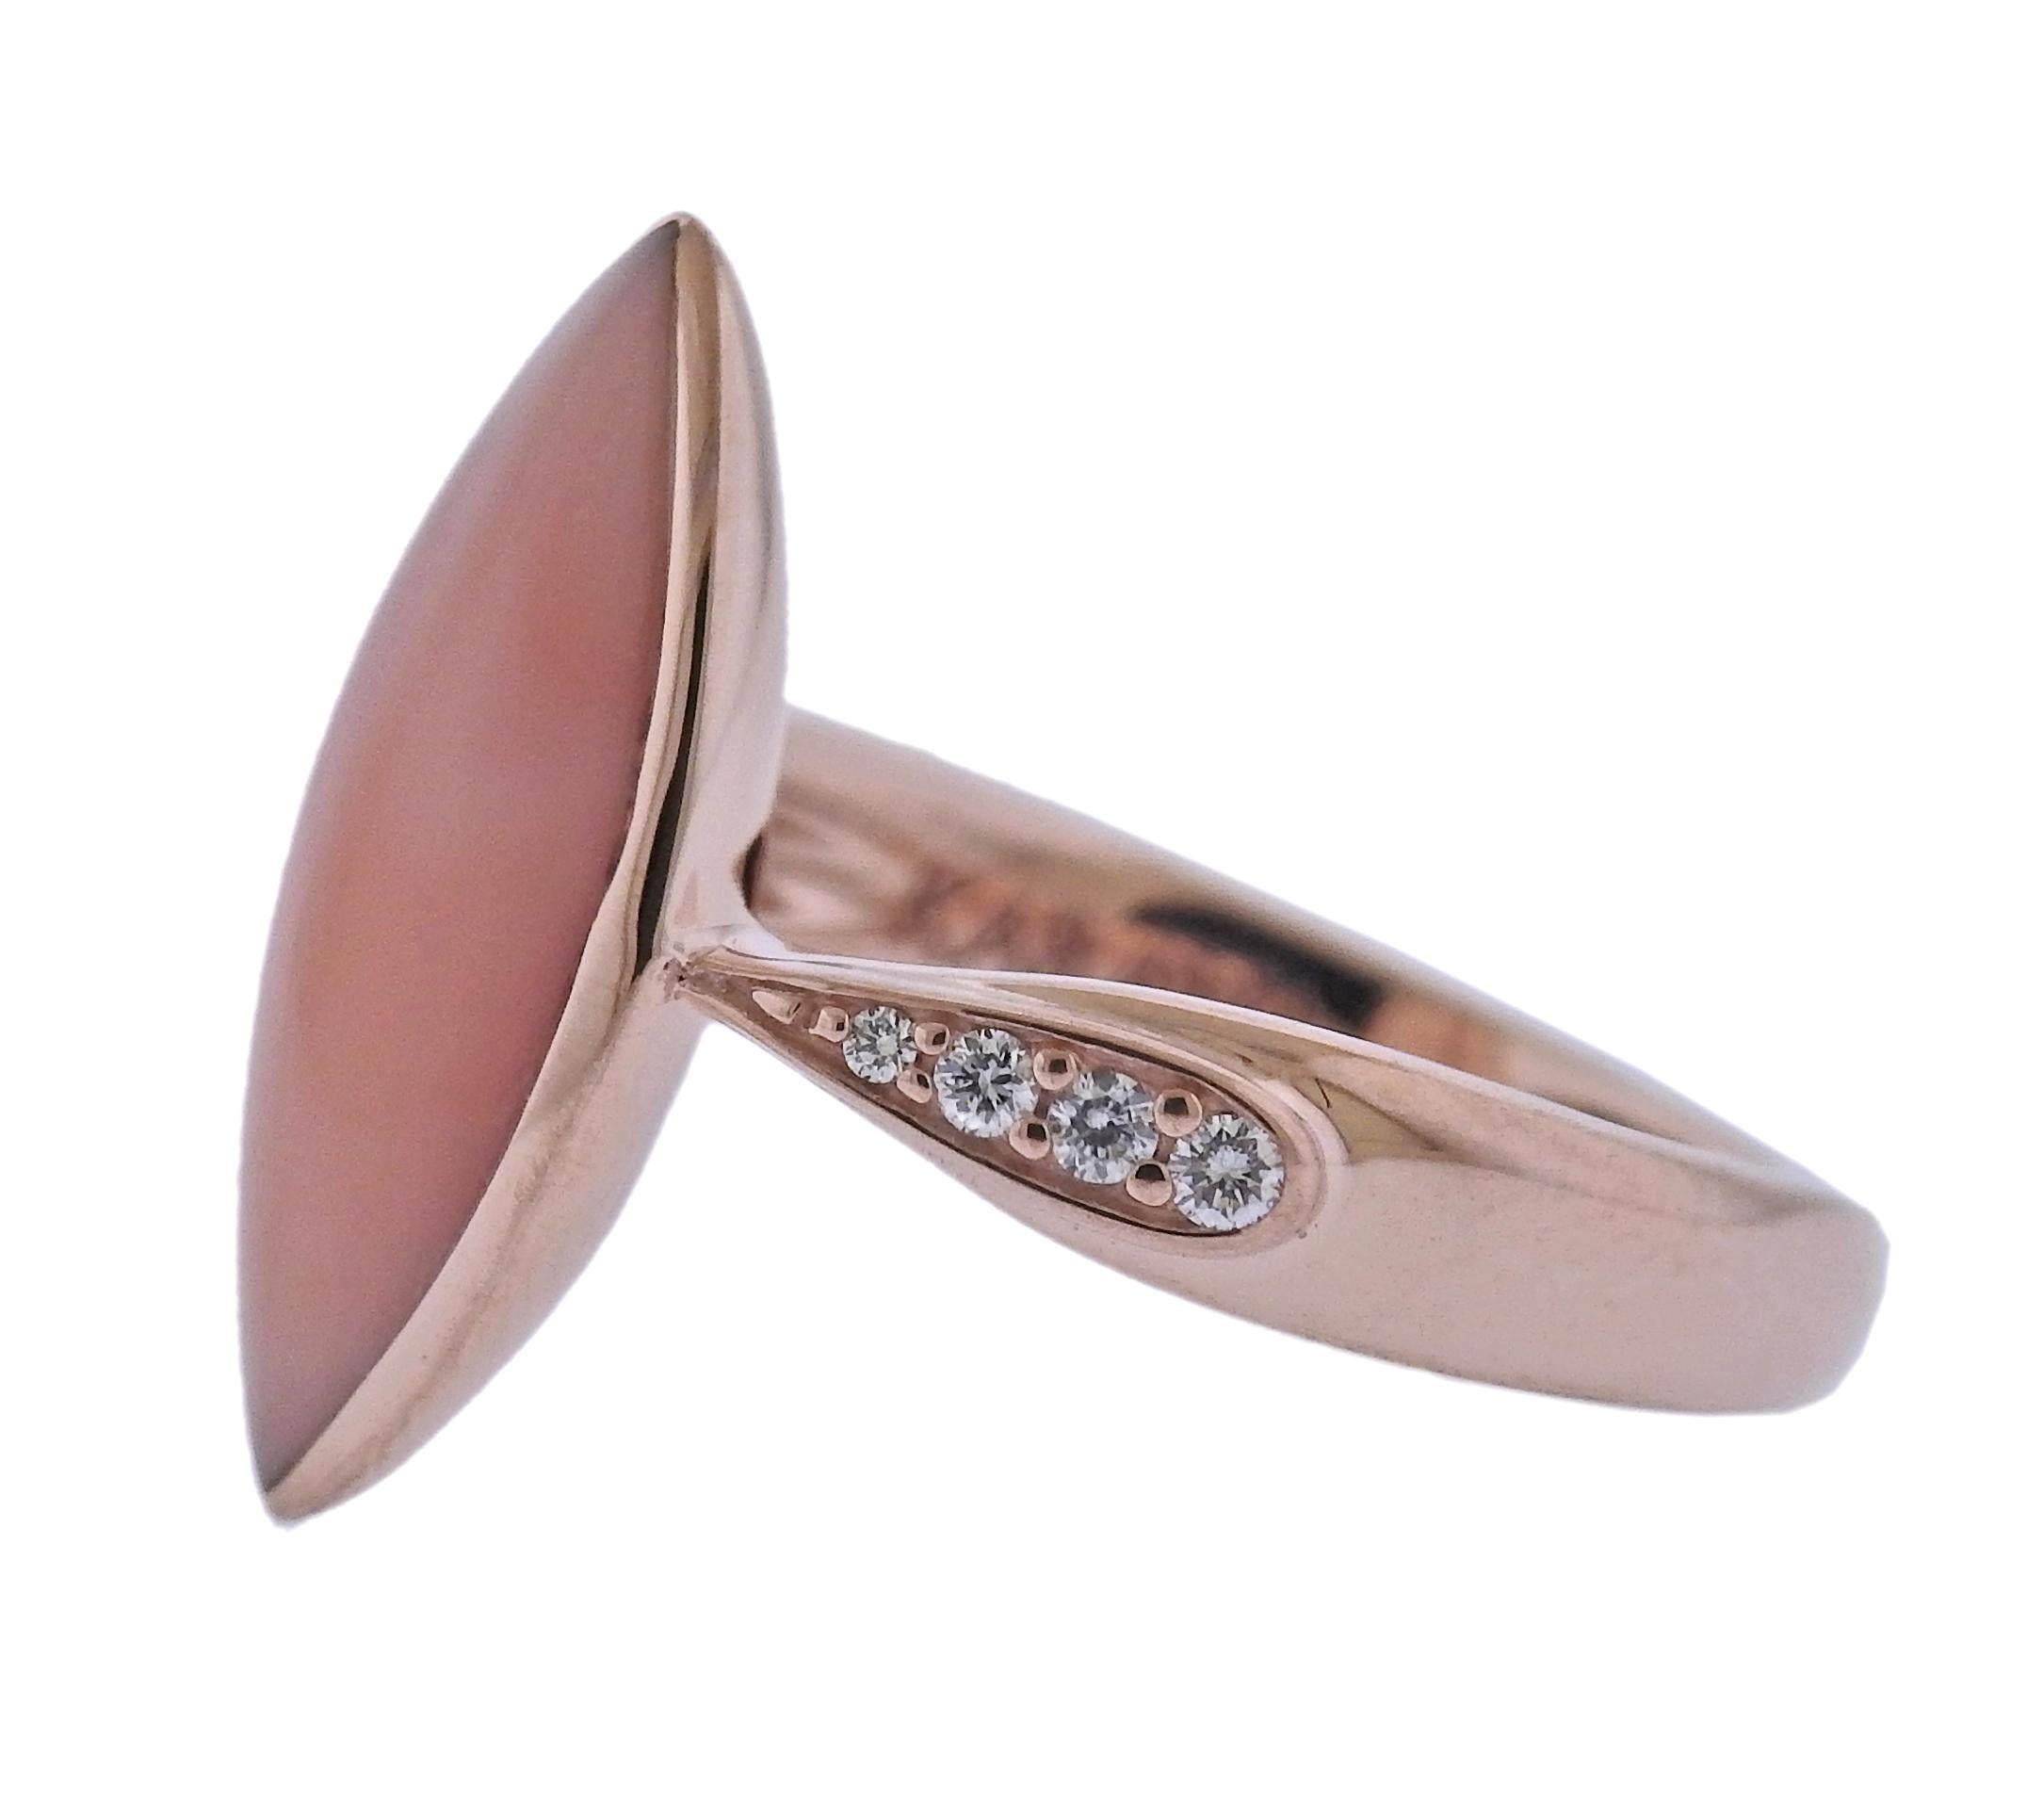 14k rose gold ring, with coral and 0.07ctw H/VS diamonds. Comes with Guarantee card. All Kabana jewelry is brand new. Ring size 7, top of the ring -  19mm x 10mm. Weight - 6.5 grams. Marked: Kabana, 14k USA.